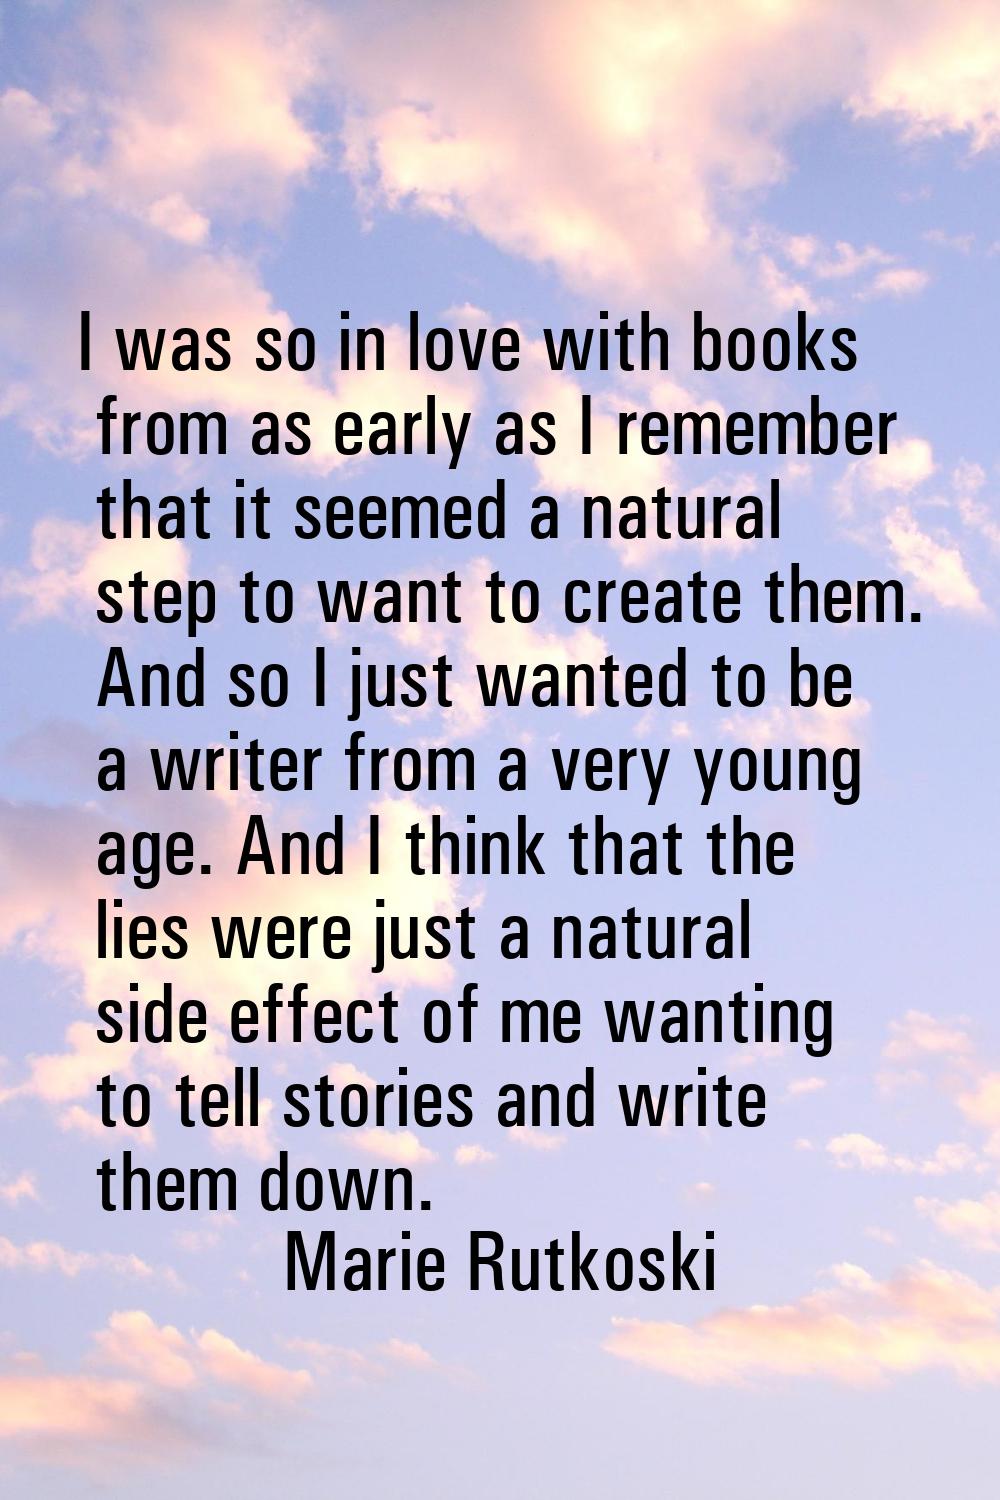 I was so in love with books from as early as I remember that it seemed a natural step to want to cr